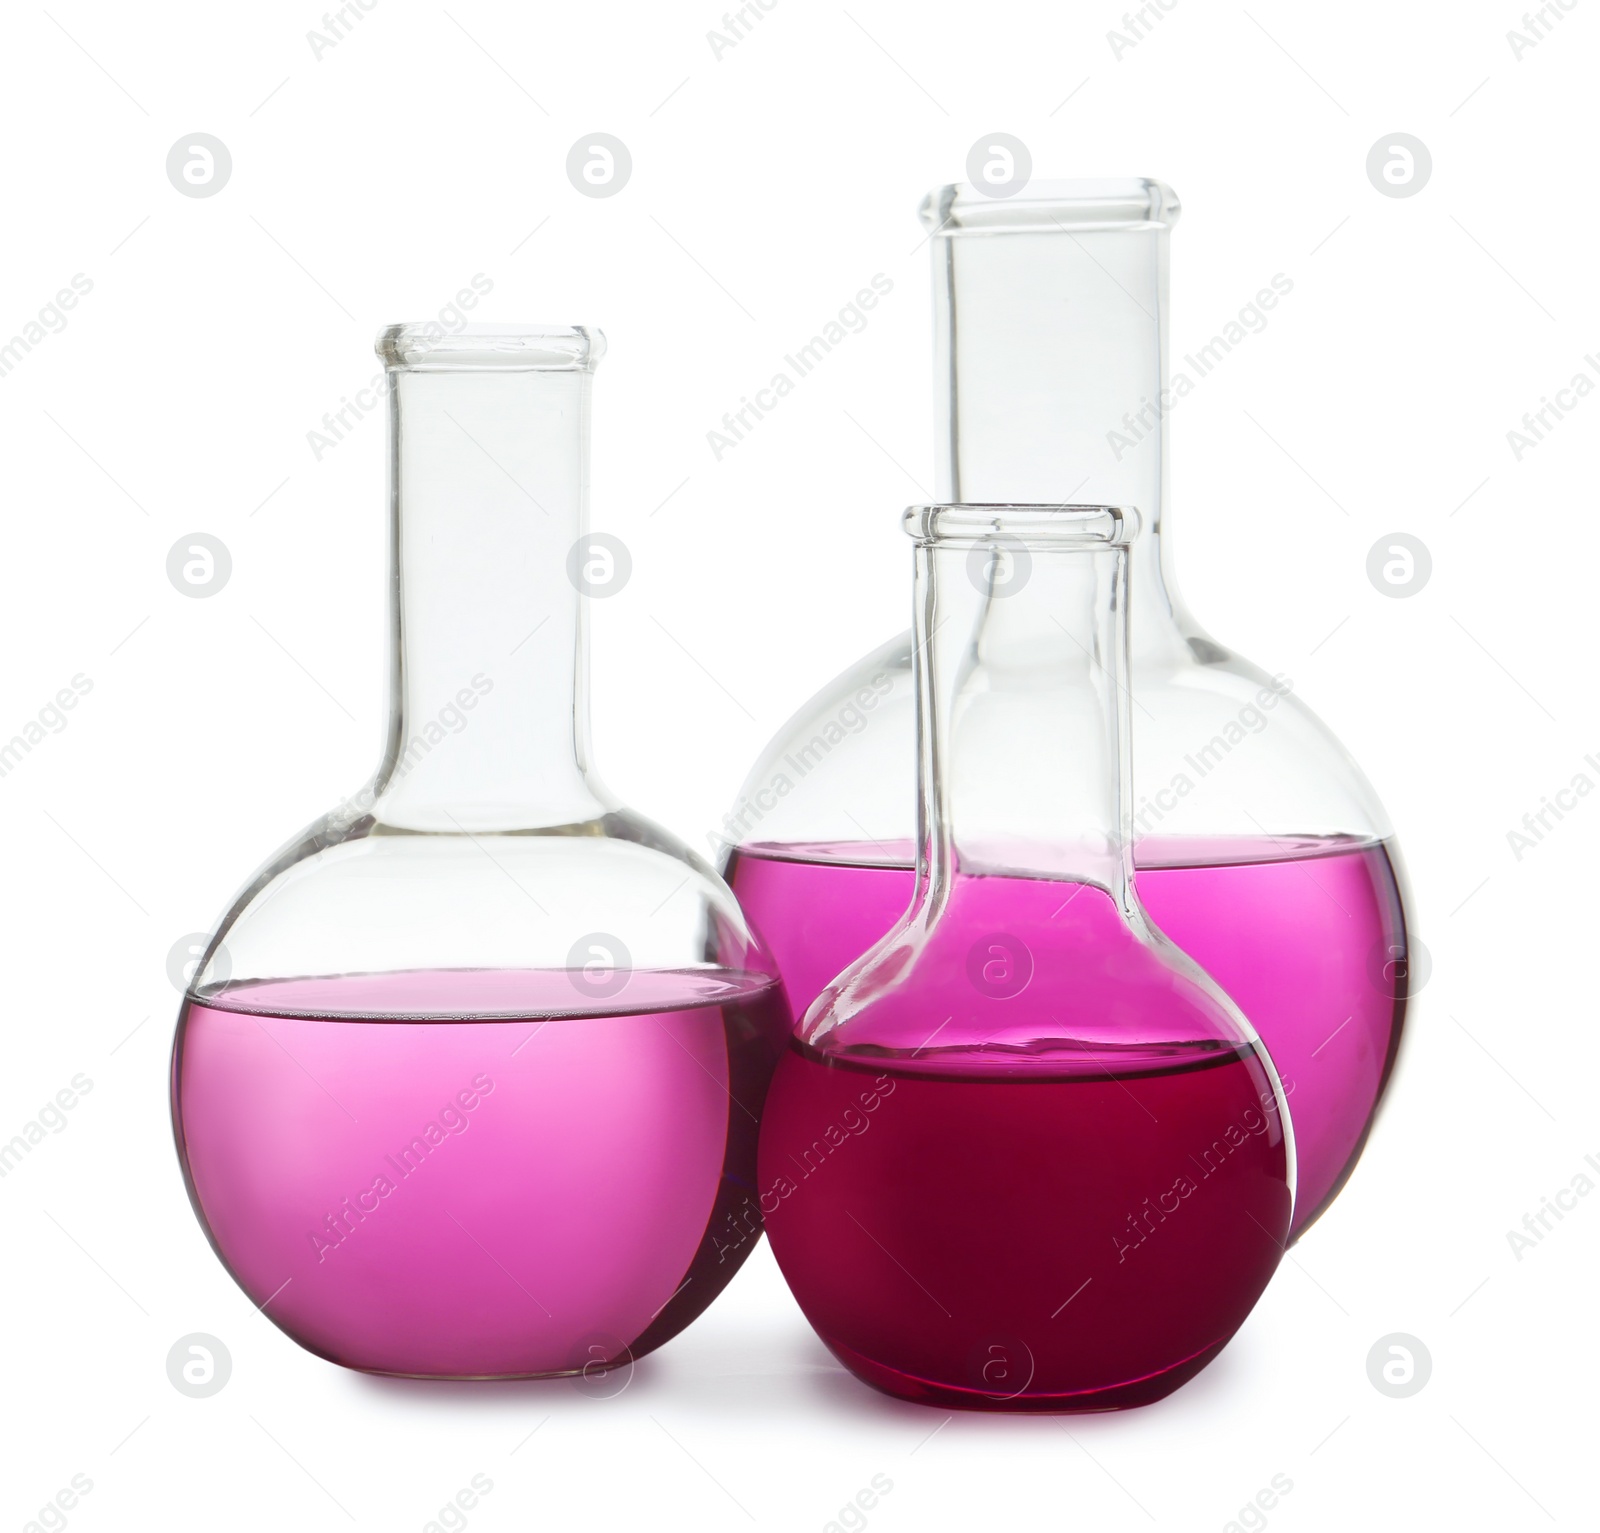 Photo of Florence flasks with purple liquid on white background